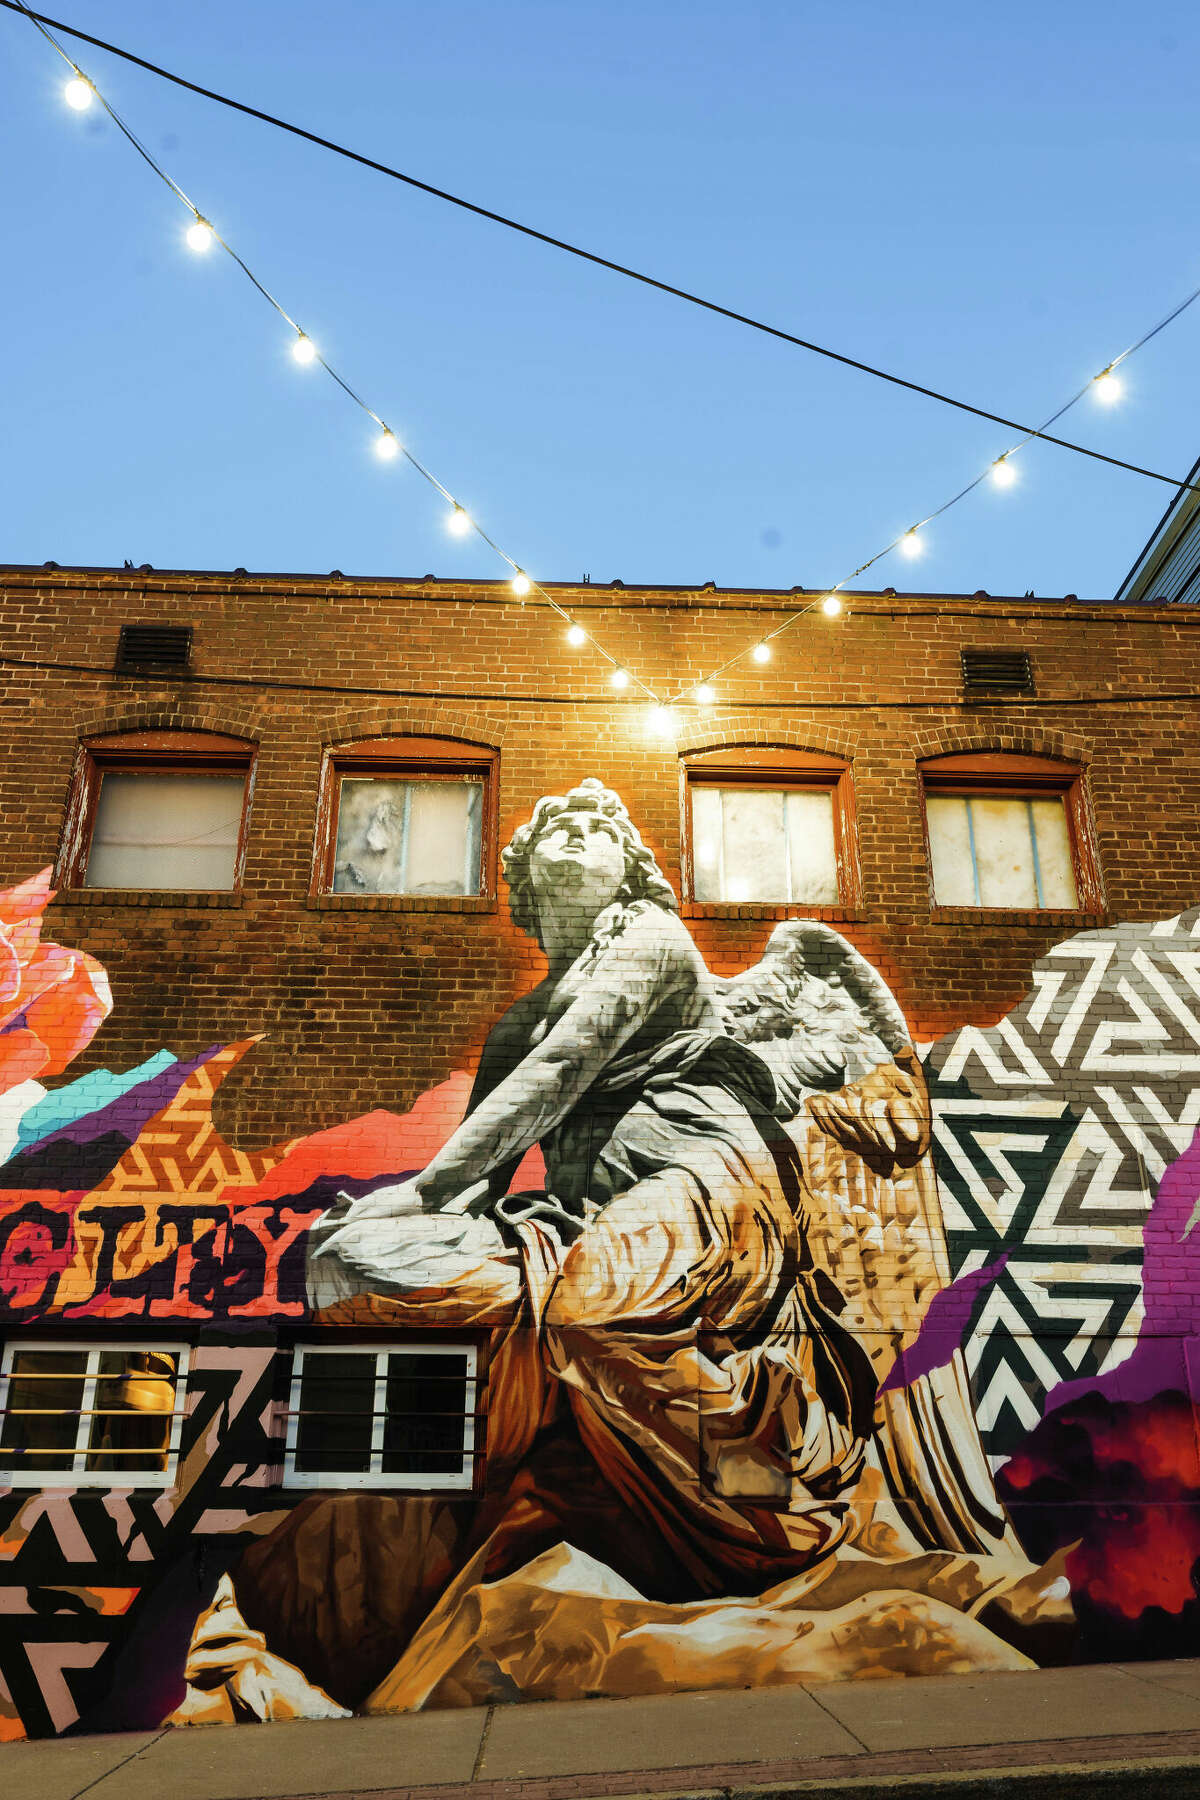 Where to find outdoor murals and public art in CT